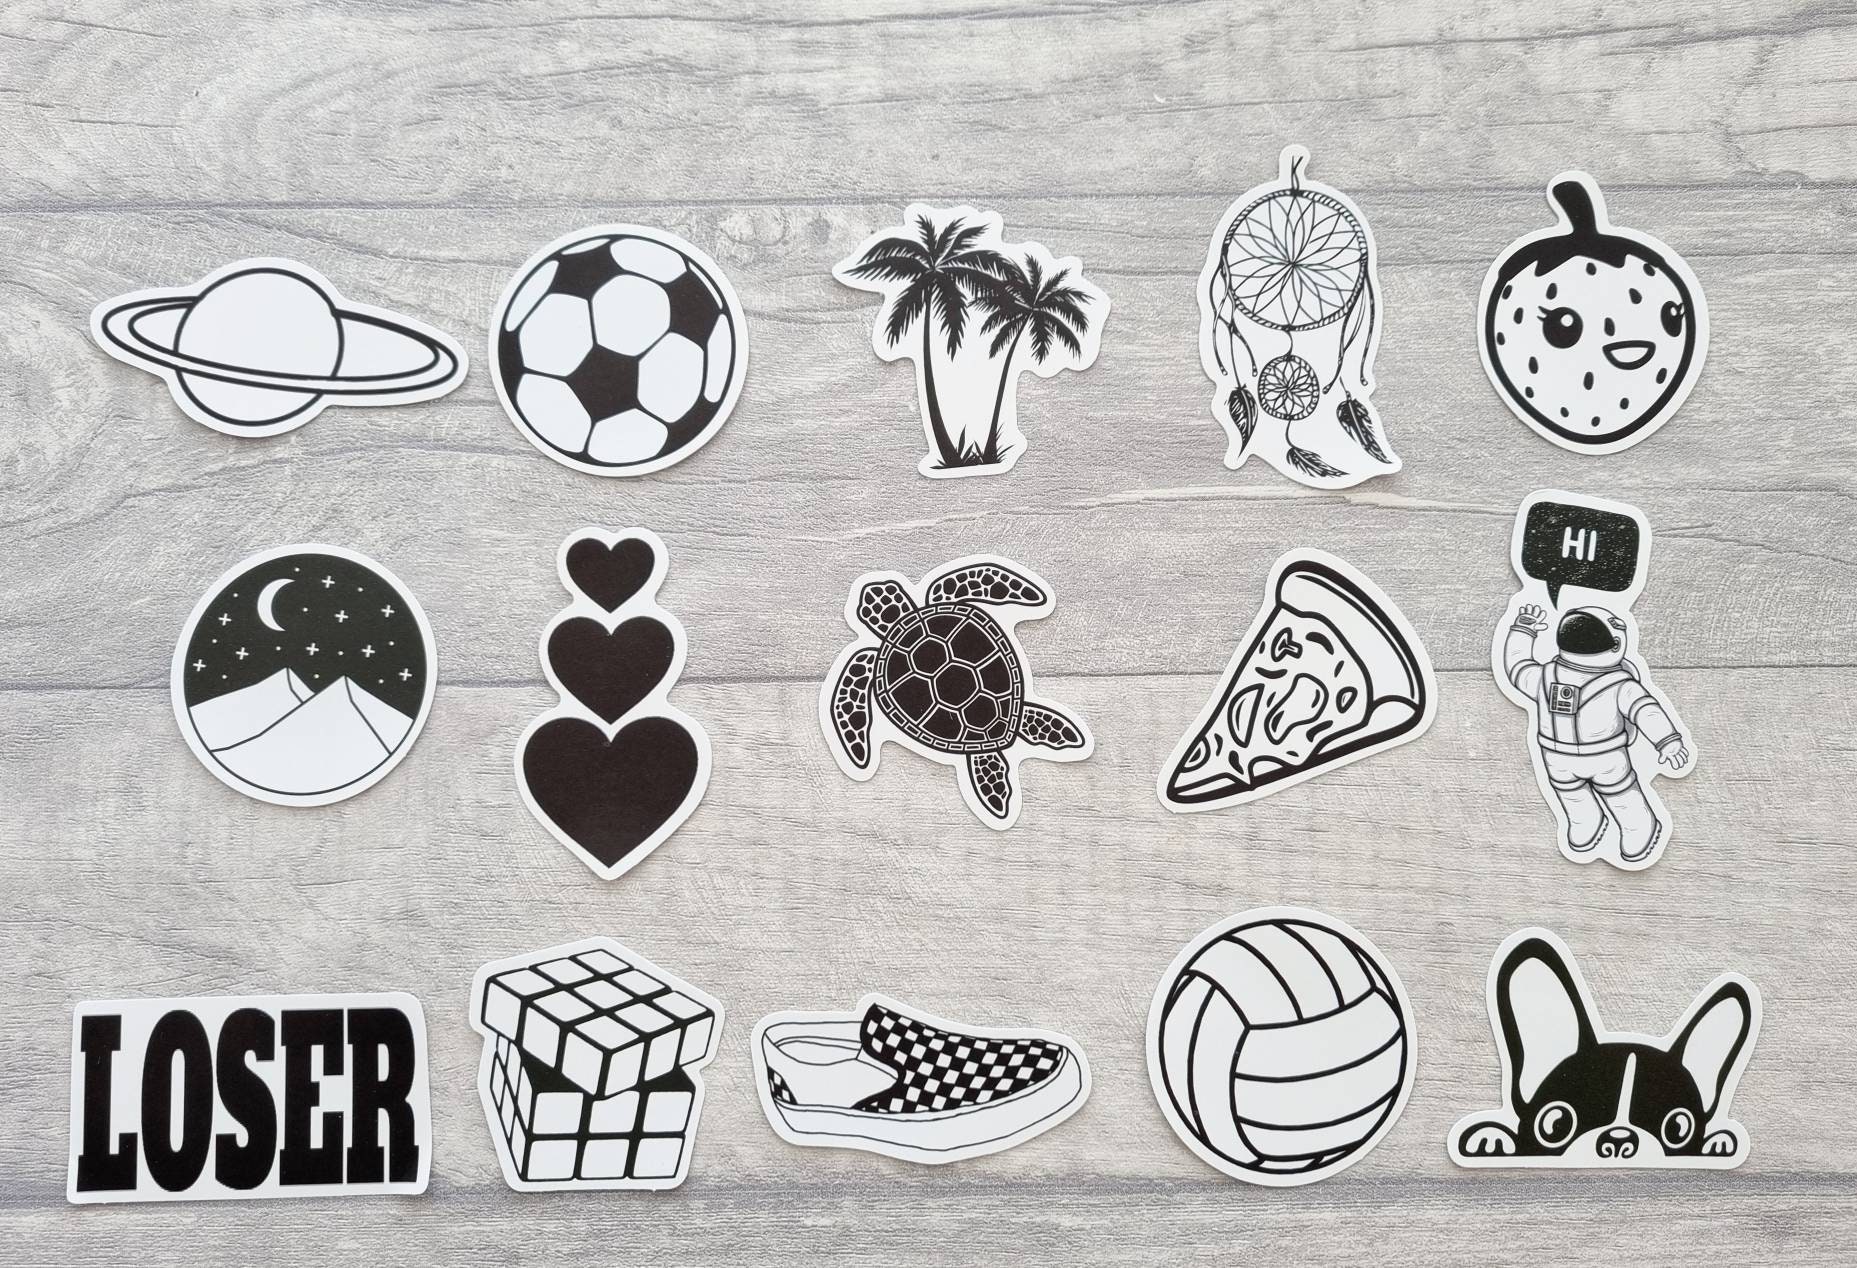 Black and White Sticker Pack Art Board Print for Sale by Lil-Salt